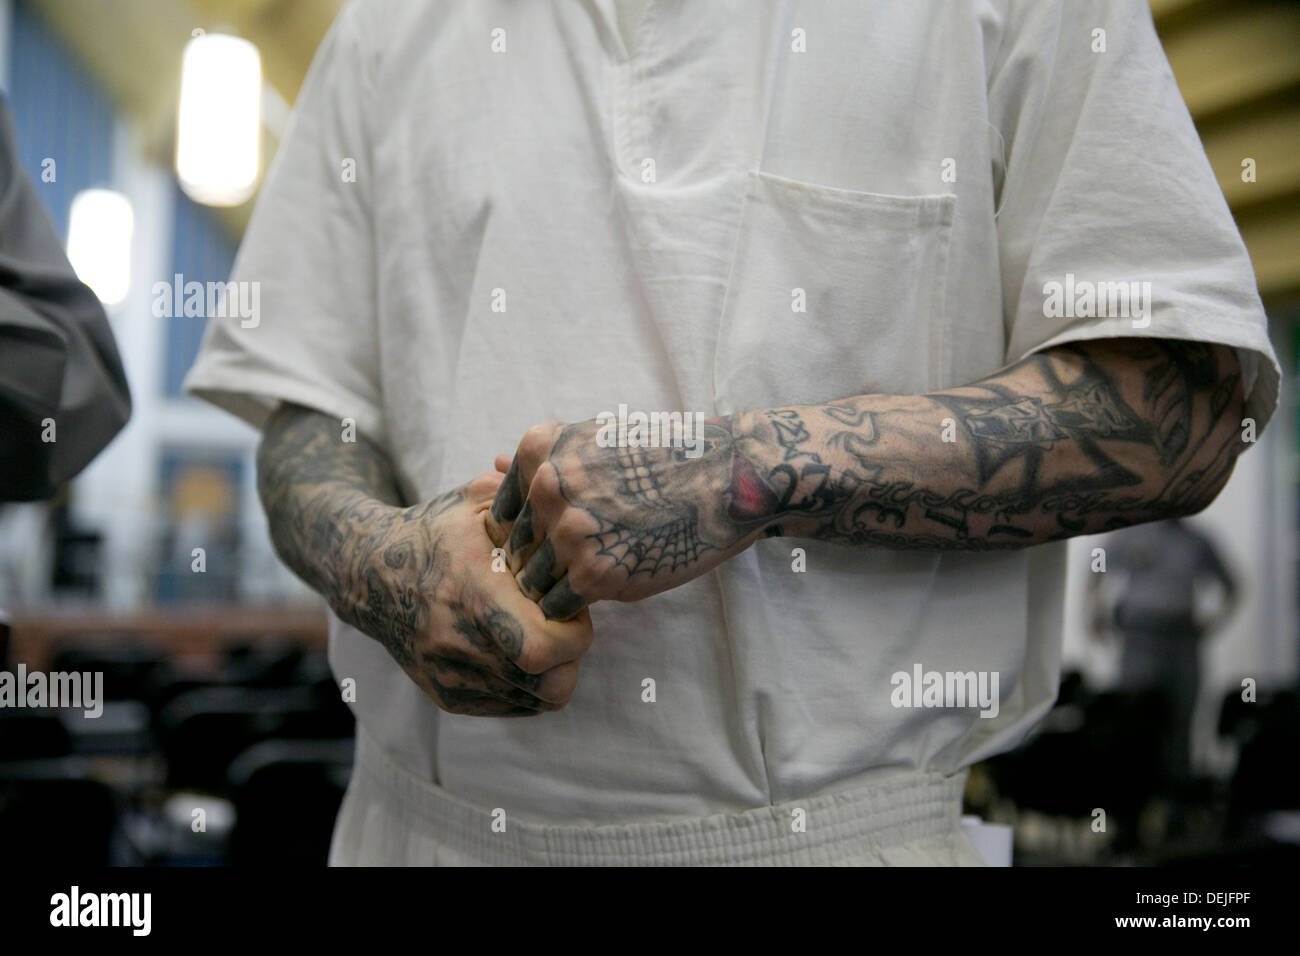 Male inmate with various tattoos on his arms inside maximum security prison near Houston, Texas Stock Photo